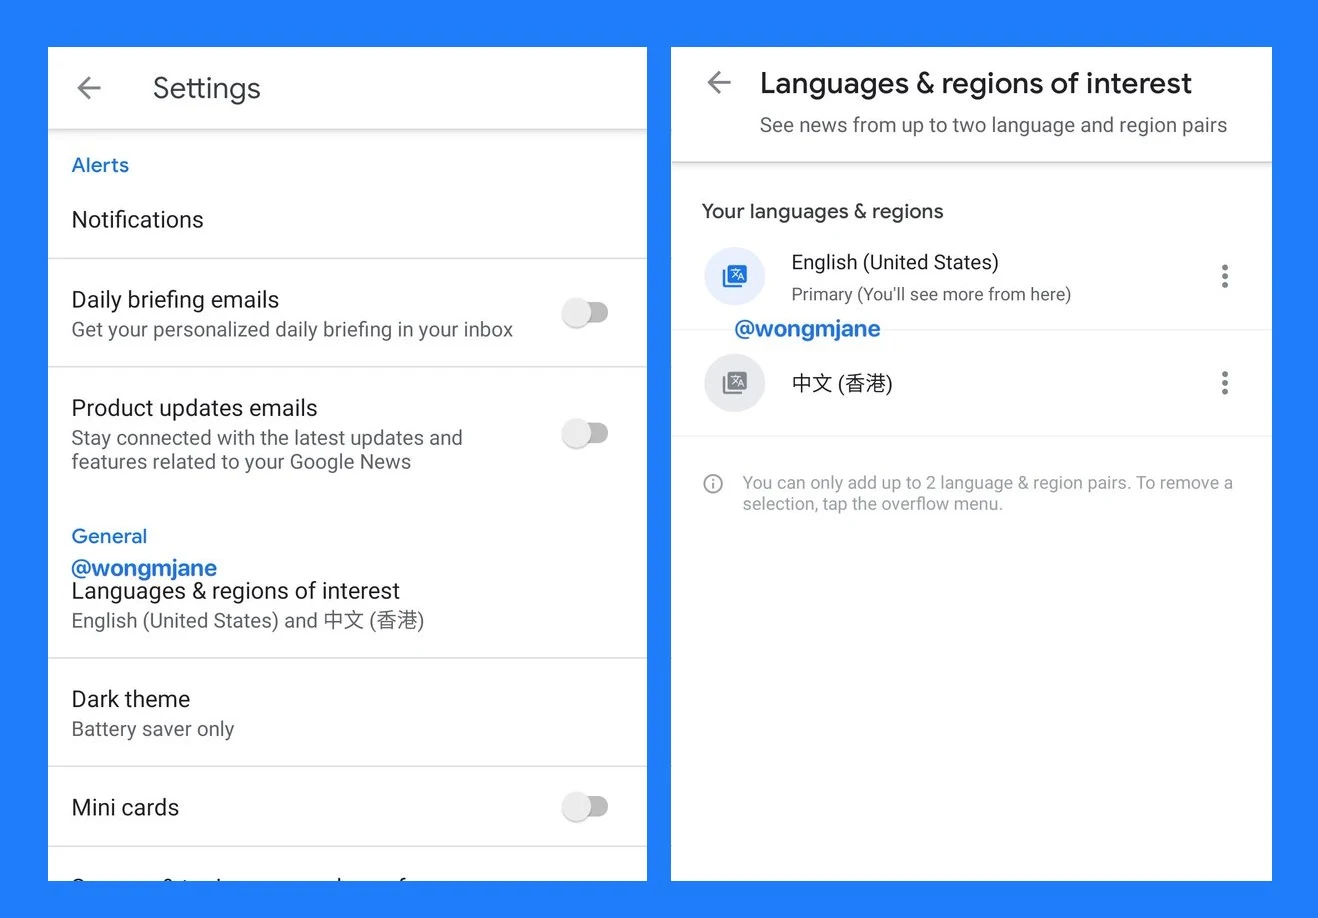 Google News is testing multiple languages/regions of interests (up to two for now).